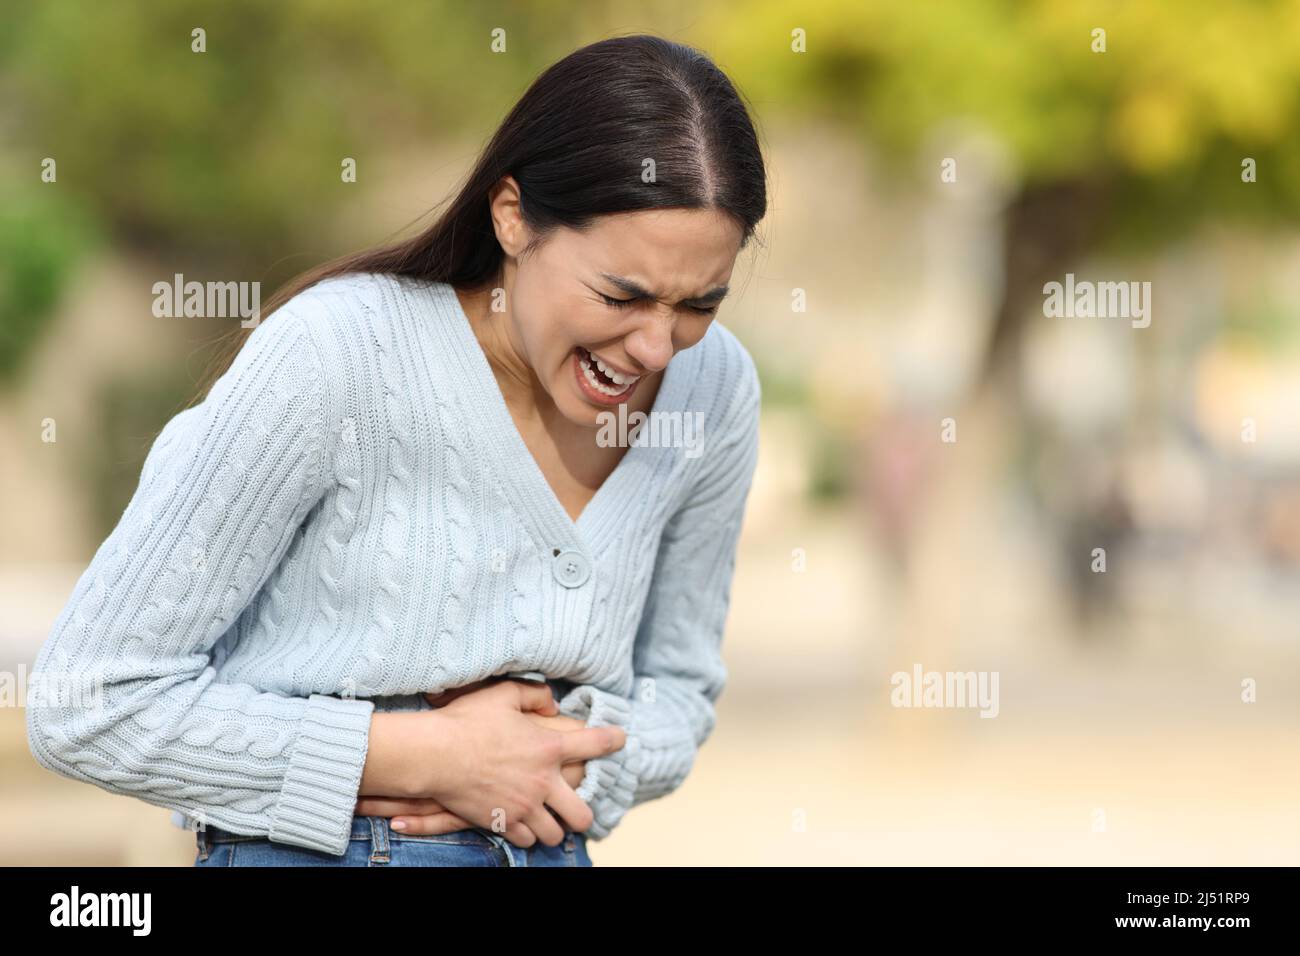 Woman crying suffering belly ache complaining in the street Stock Photo